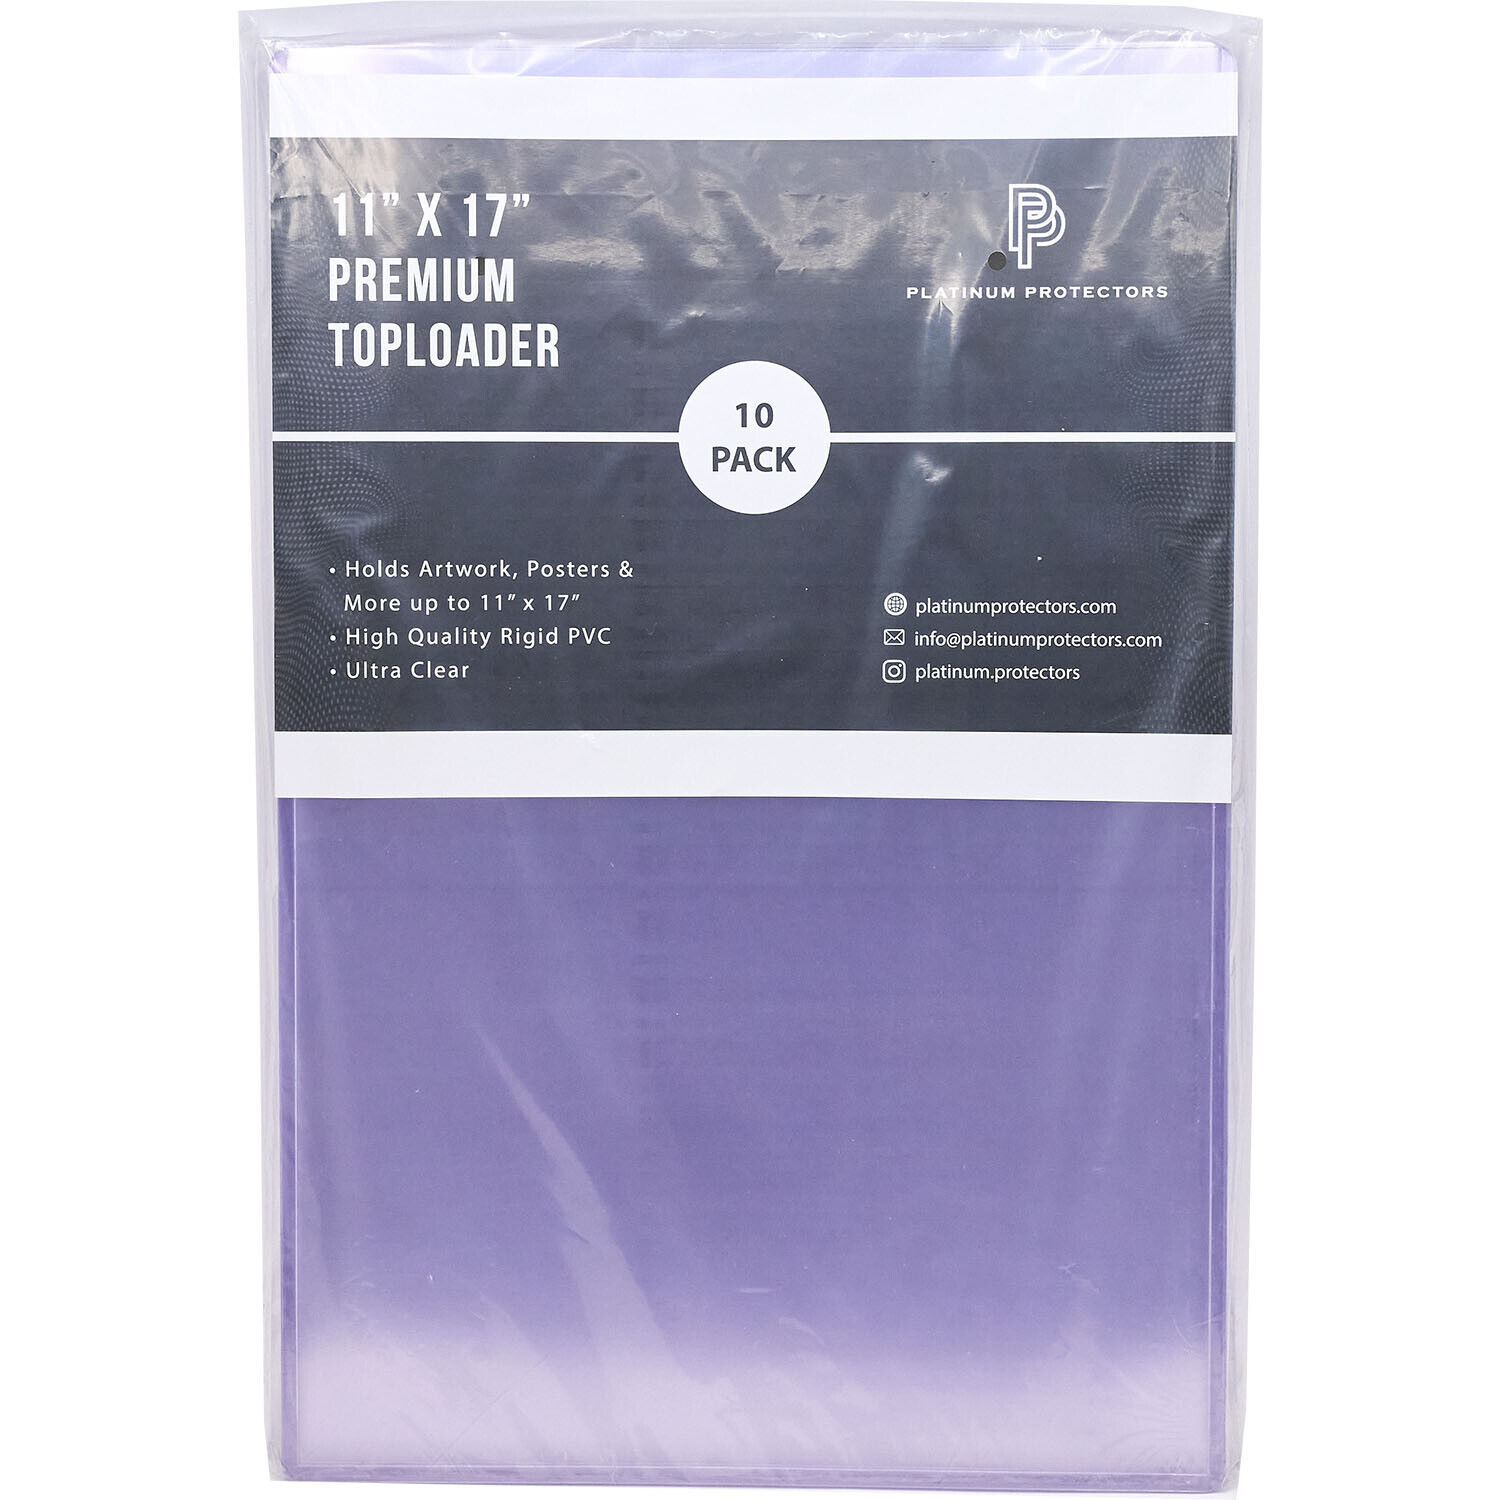 Platinum Protectors 11x17 Toploaders for Posters Lithographs Art Plastic Holders